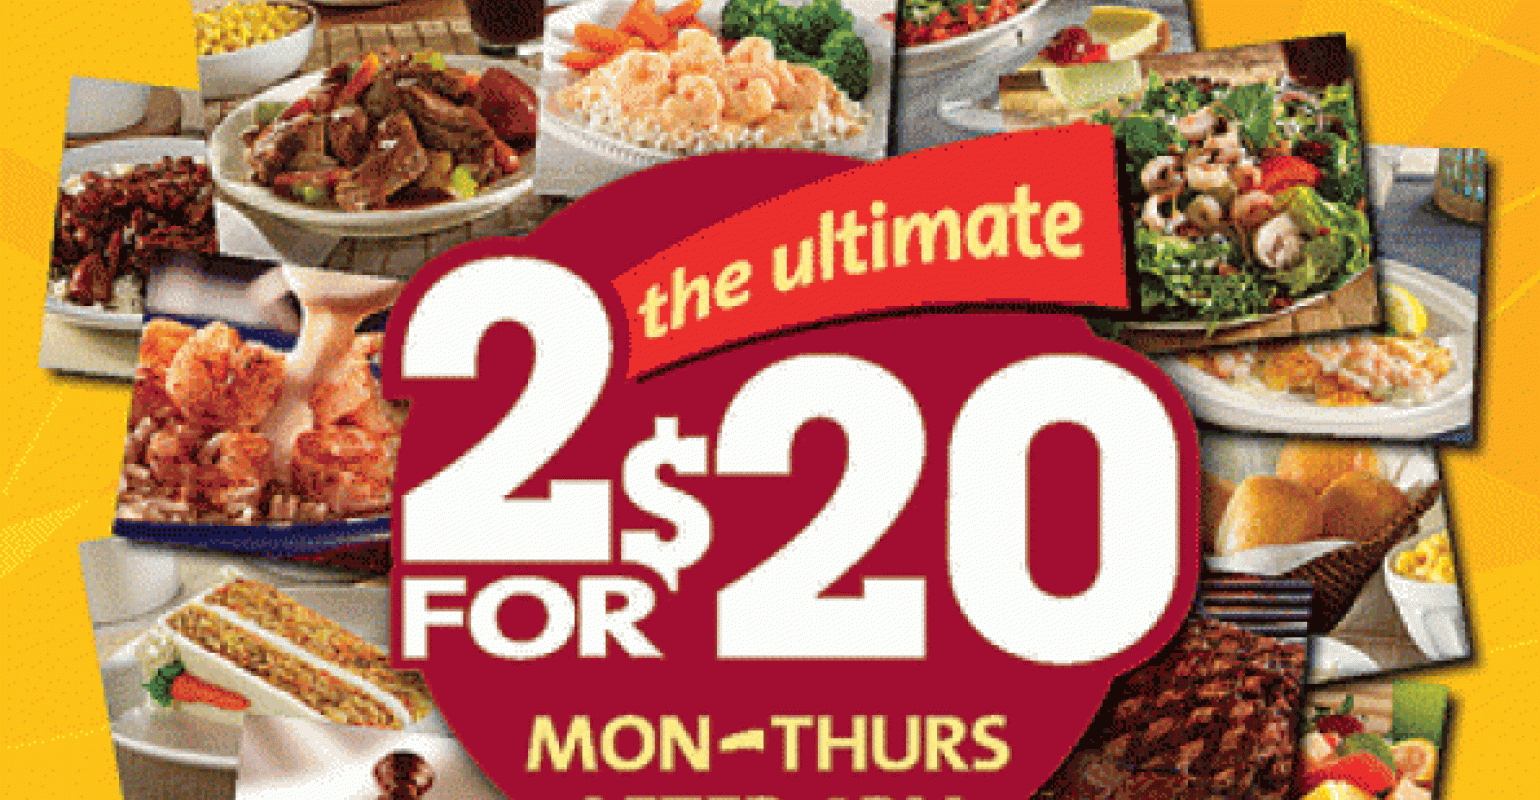 Value dining promotions